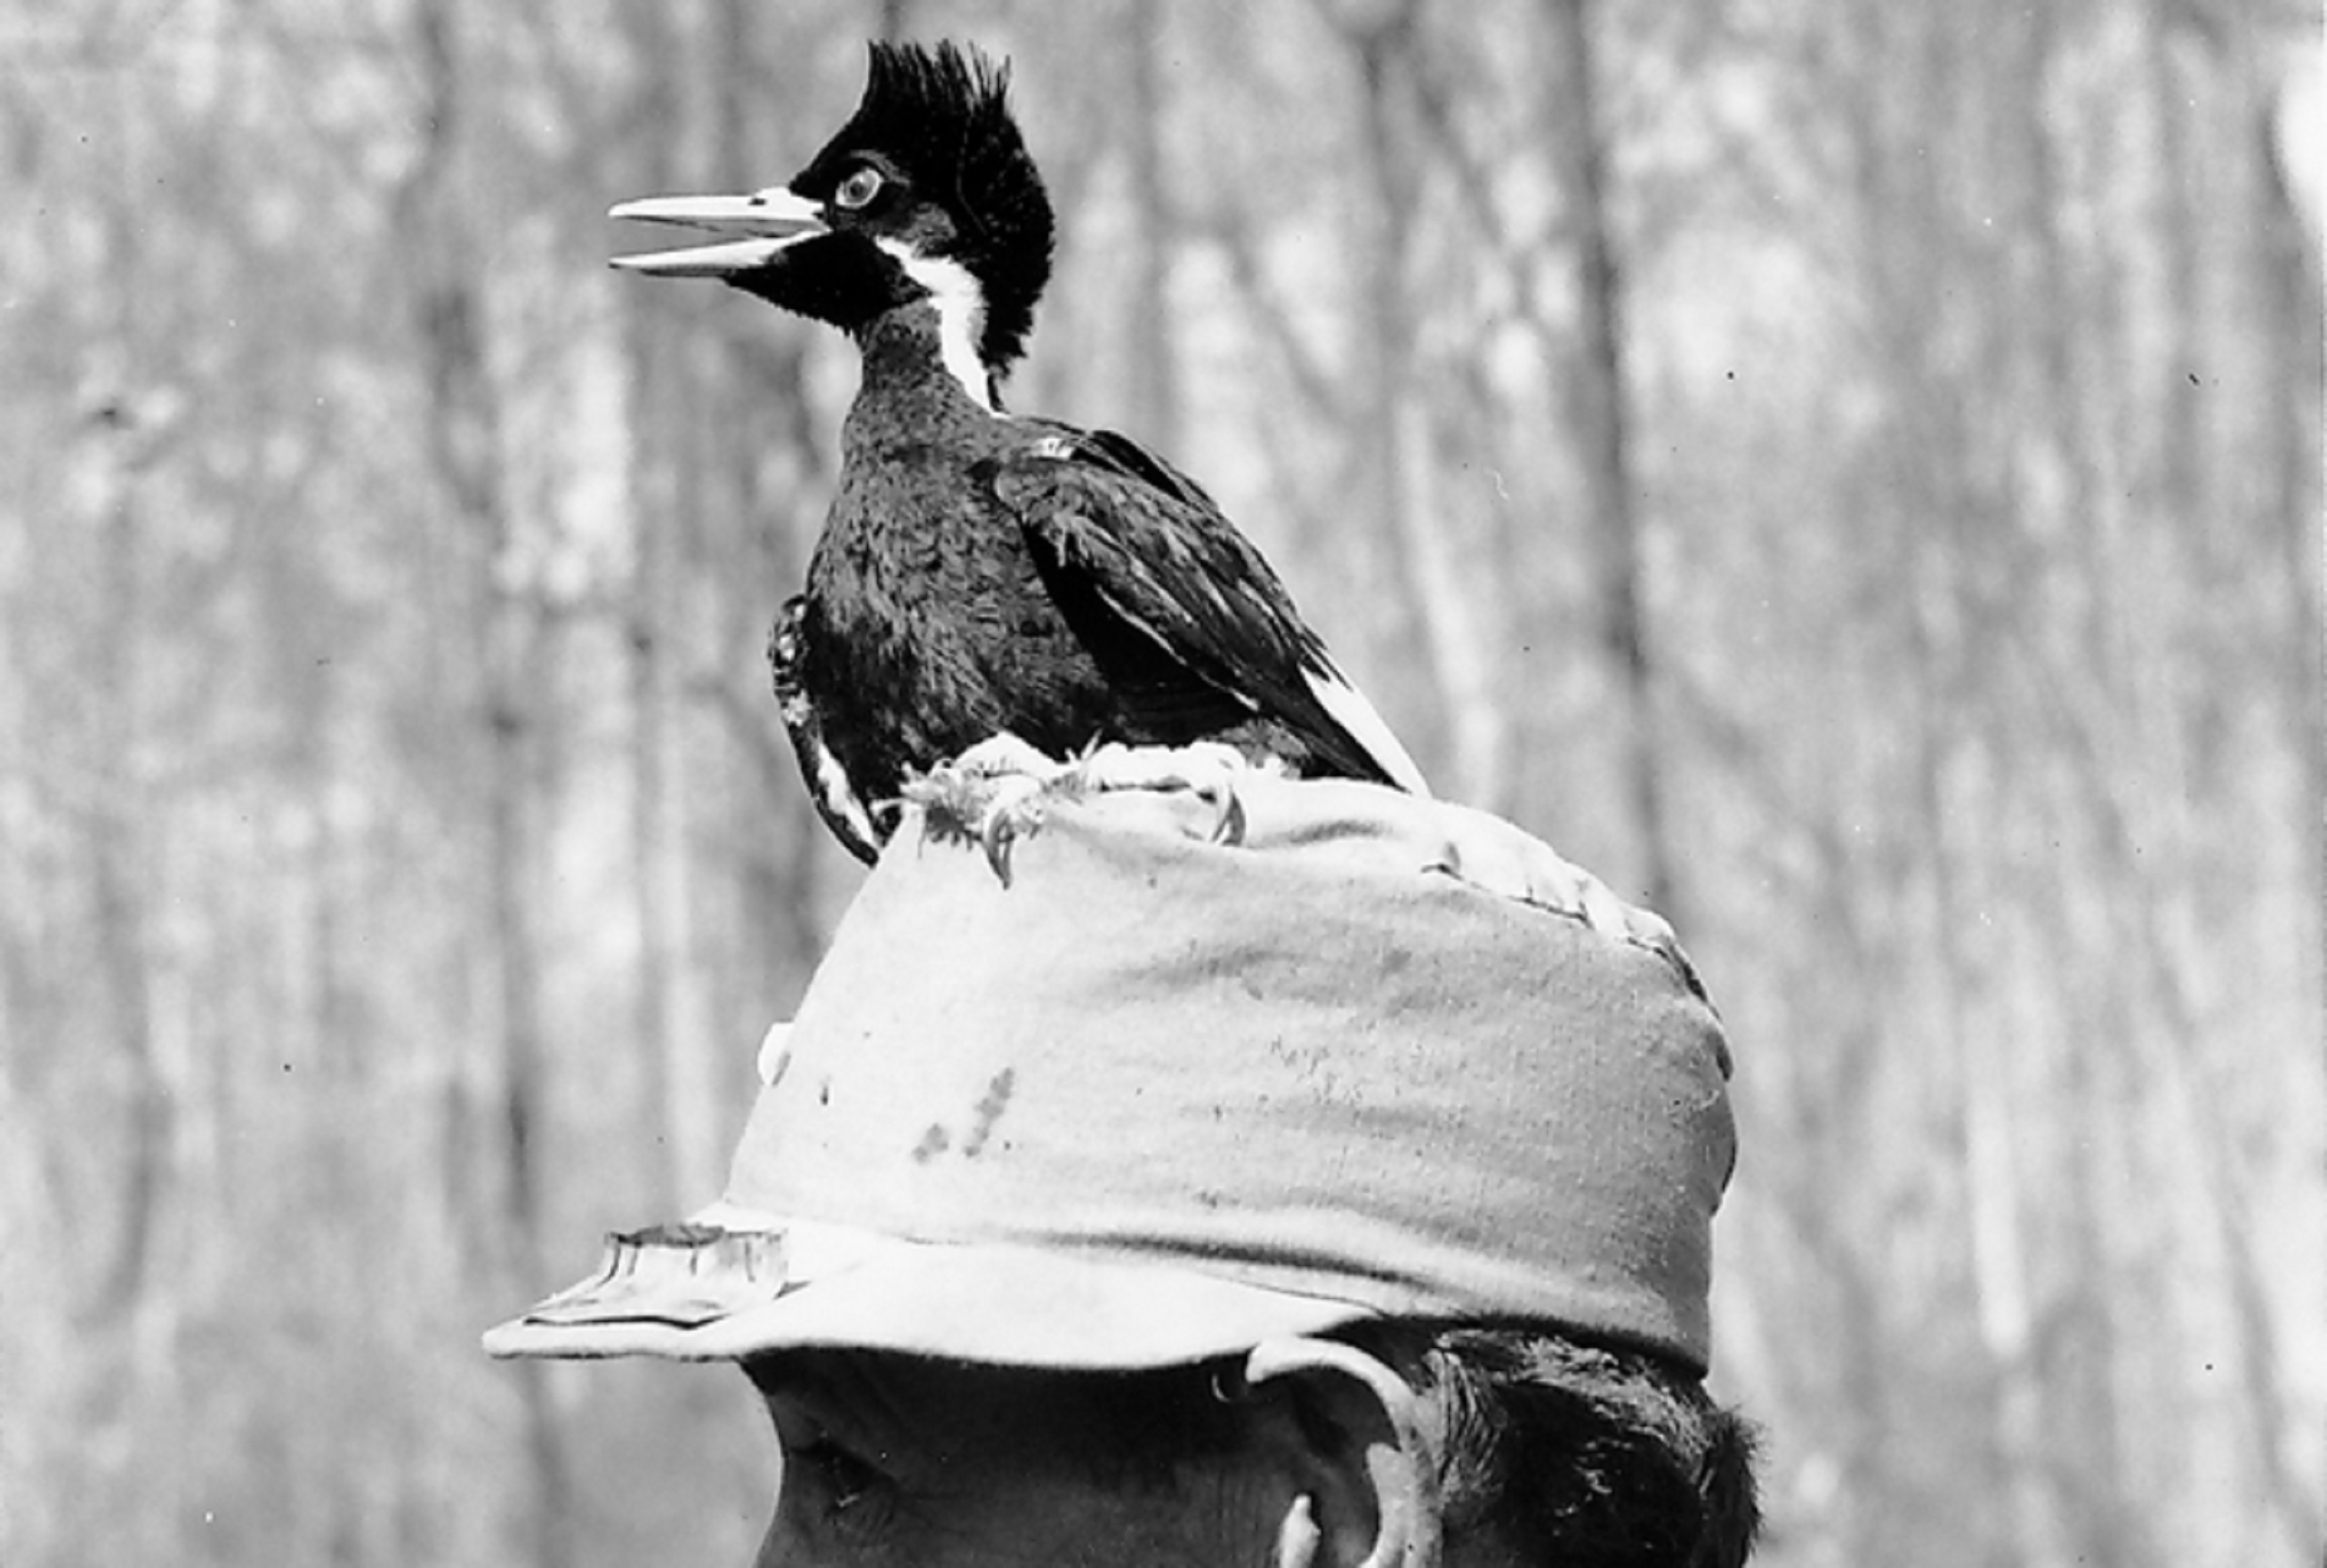 A black and white photo. A close up shot and side view of an ivory-billed woodpecker standing on top of man’s hat